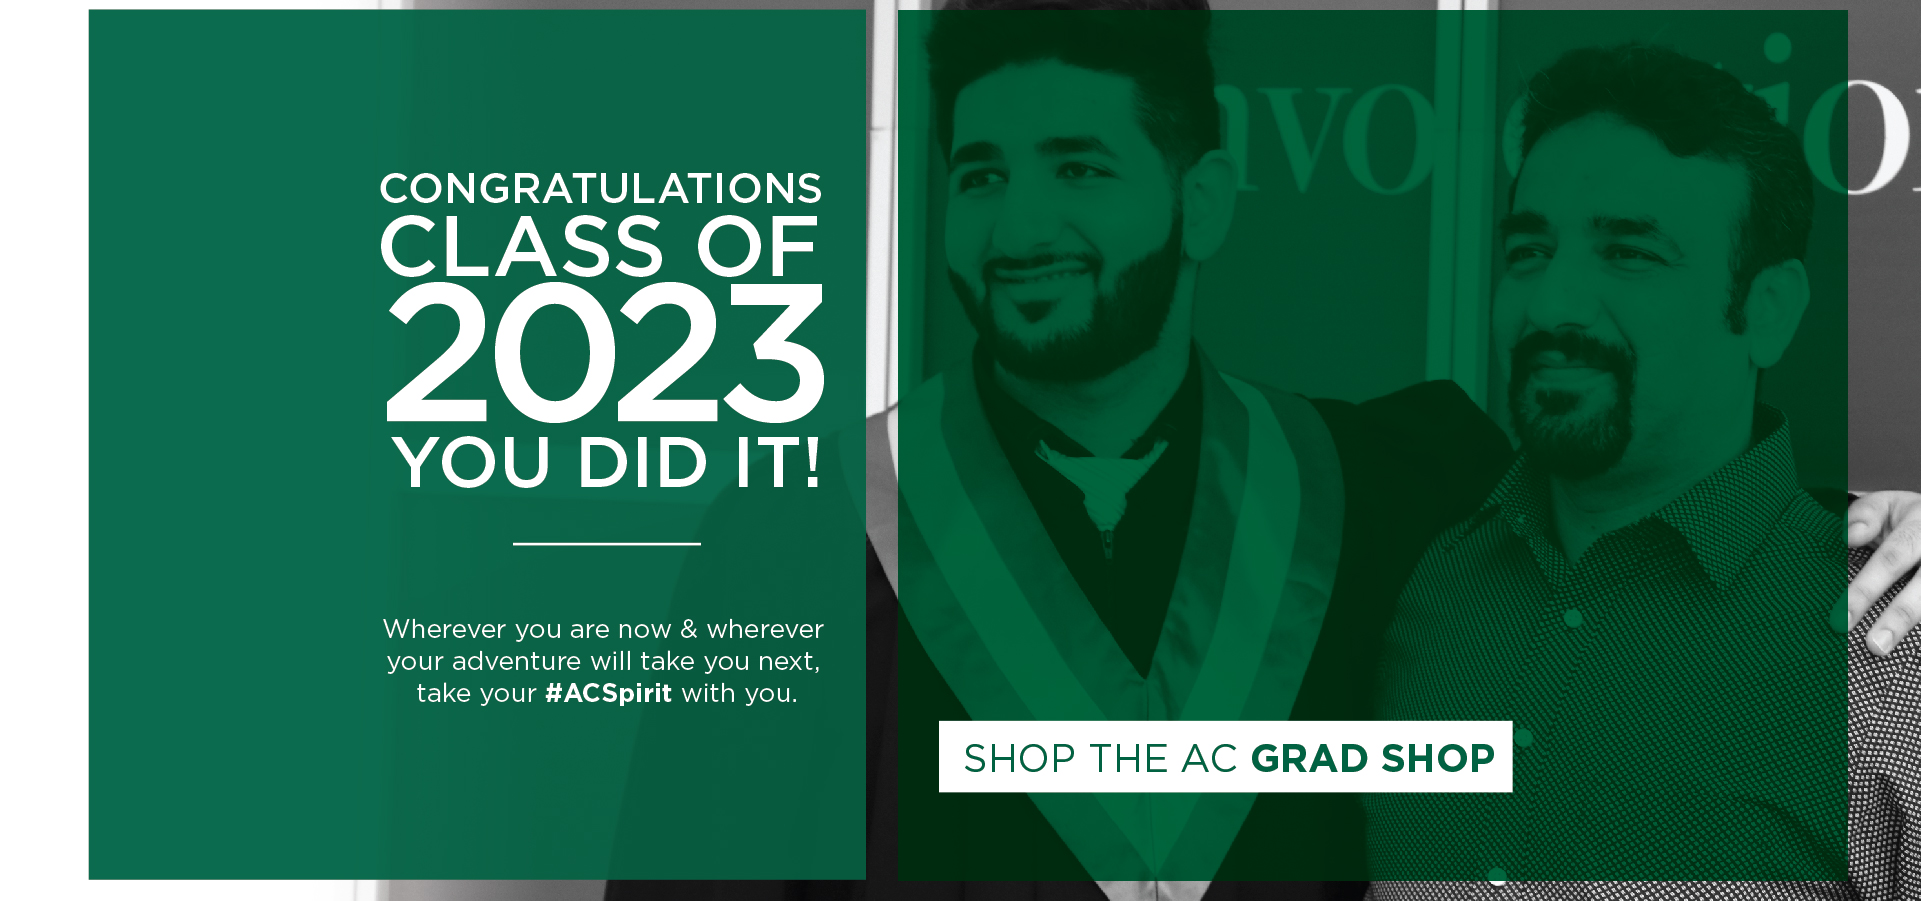 Congratulations Class of 2023. You Did It! Wherever you are now and wherever your adventure will take you next, take your #ACSpirit with you.